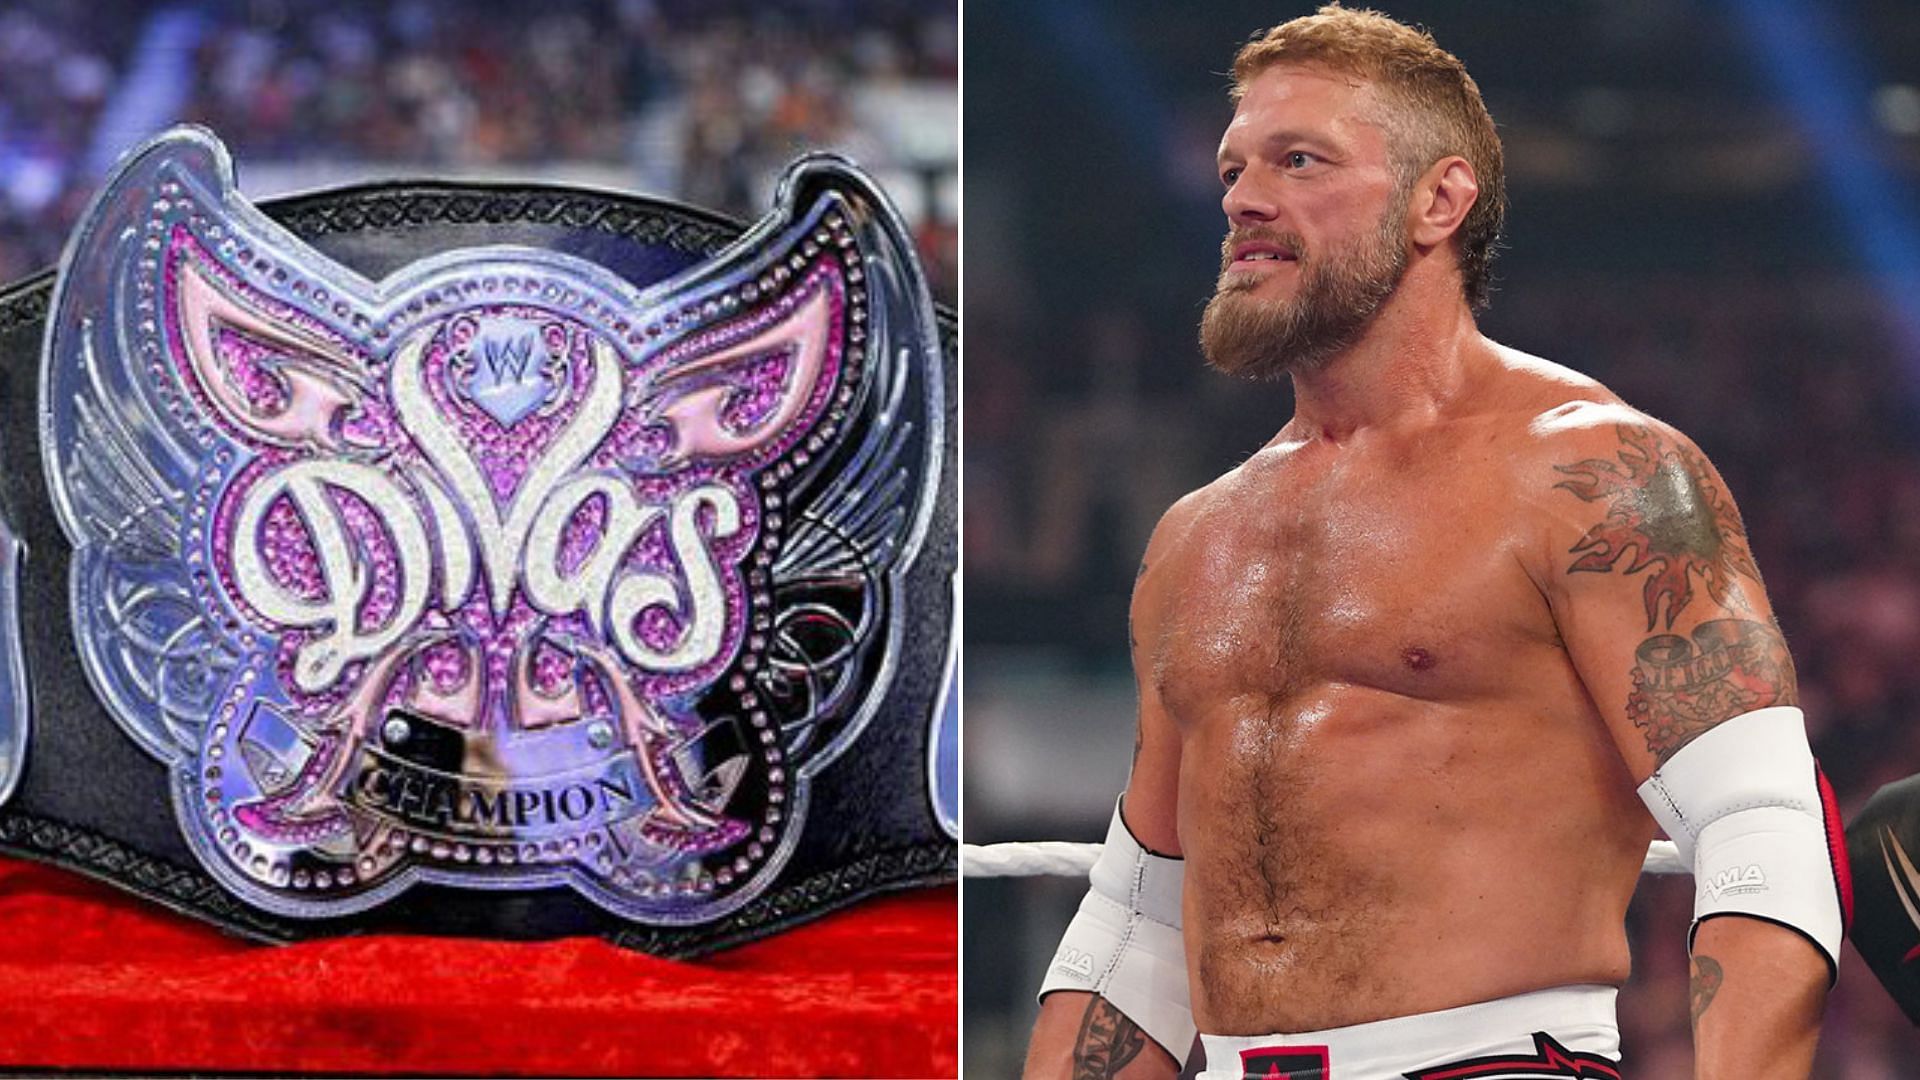 Edge was involved in a match with this WWE Superstar at Royal Rumble 